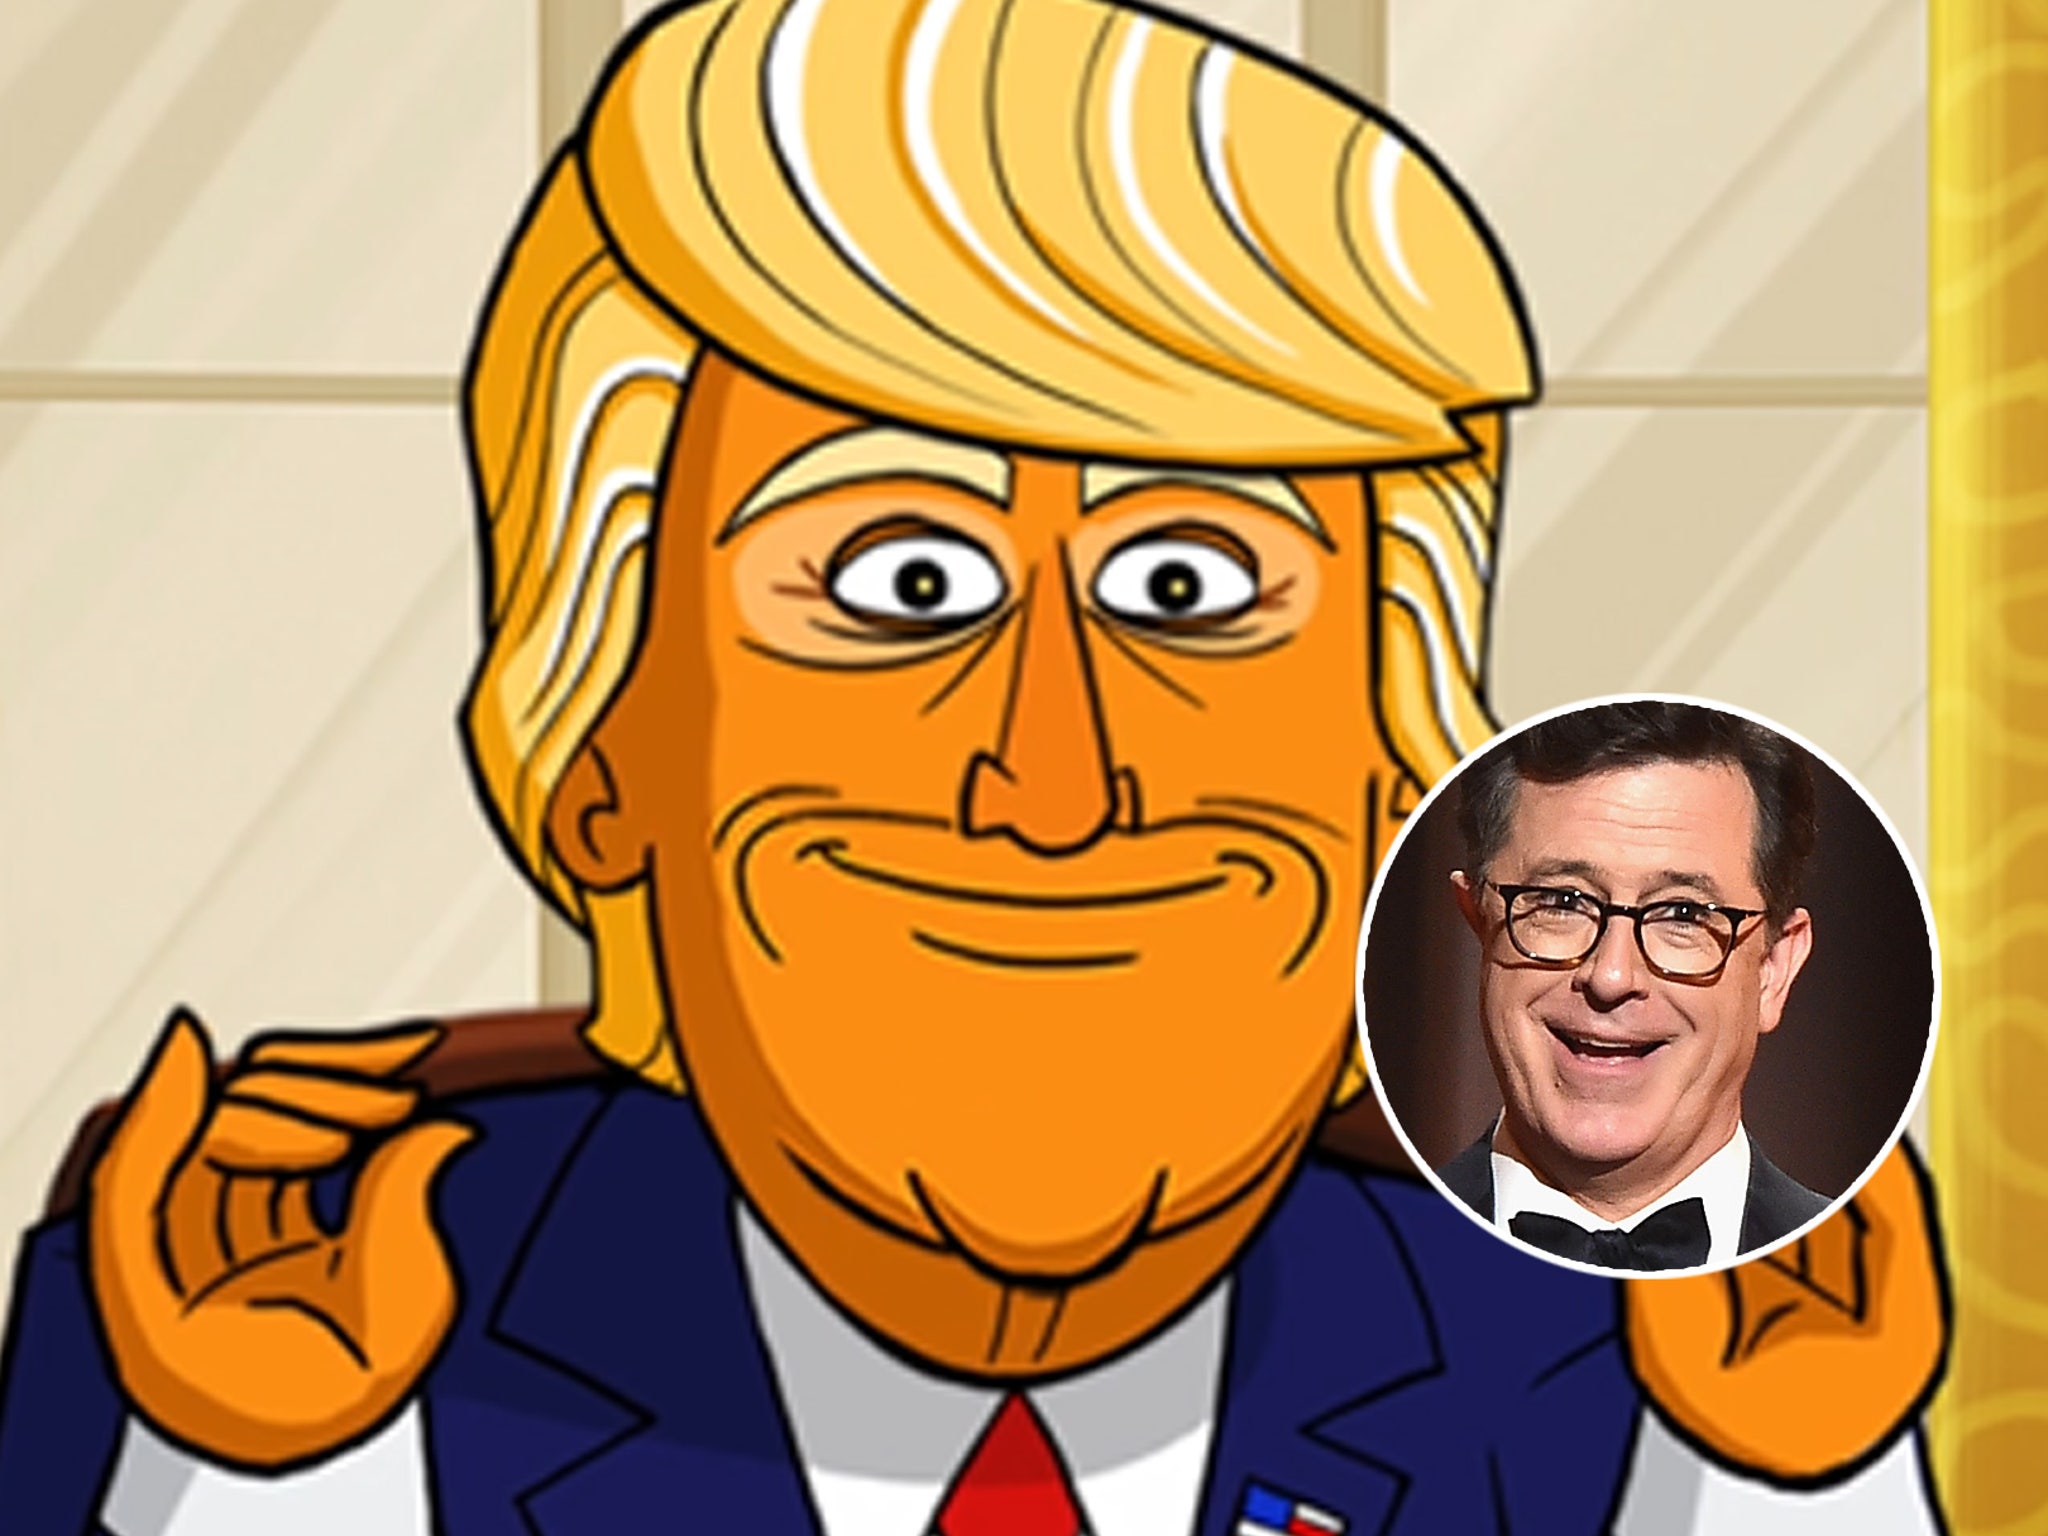 Donald Trump Animated Series from Stephen Colbert Coming to Showtime